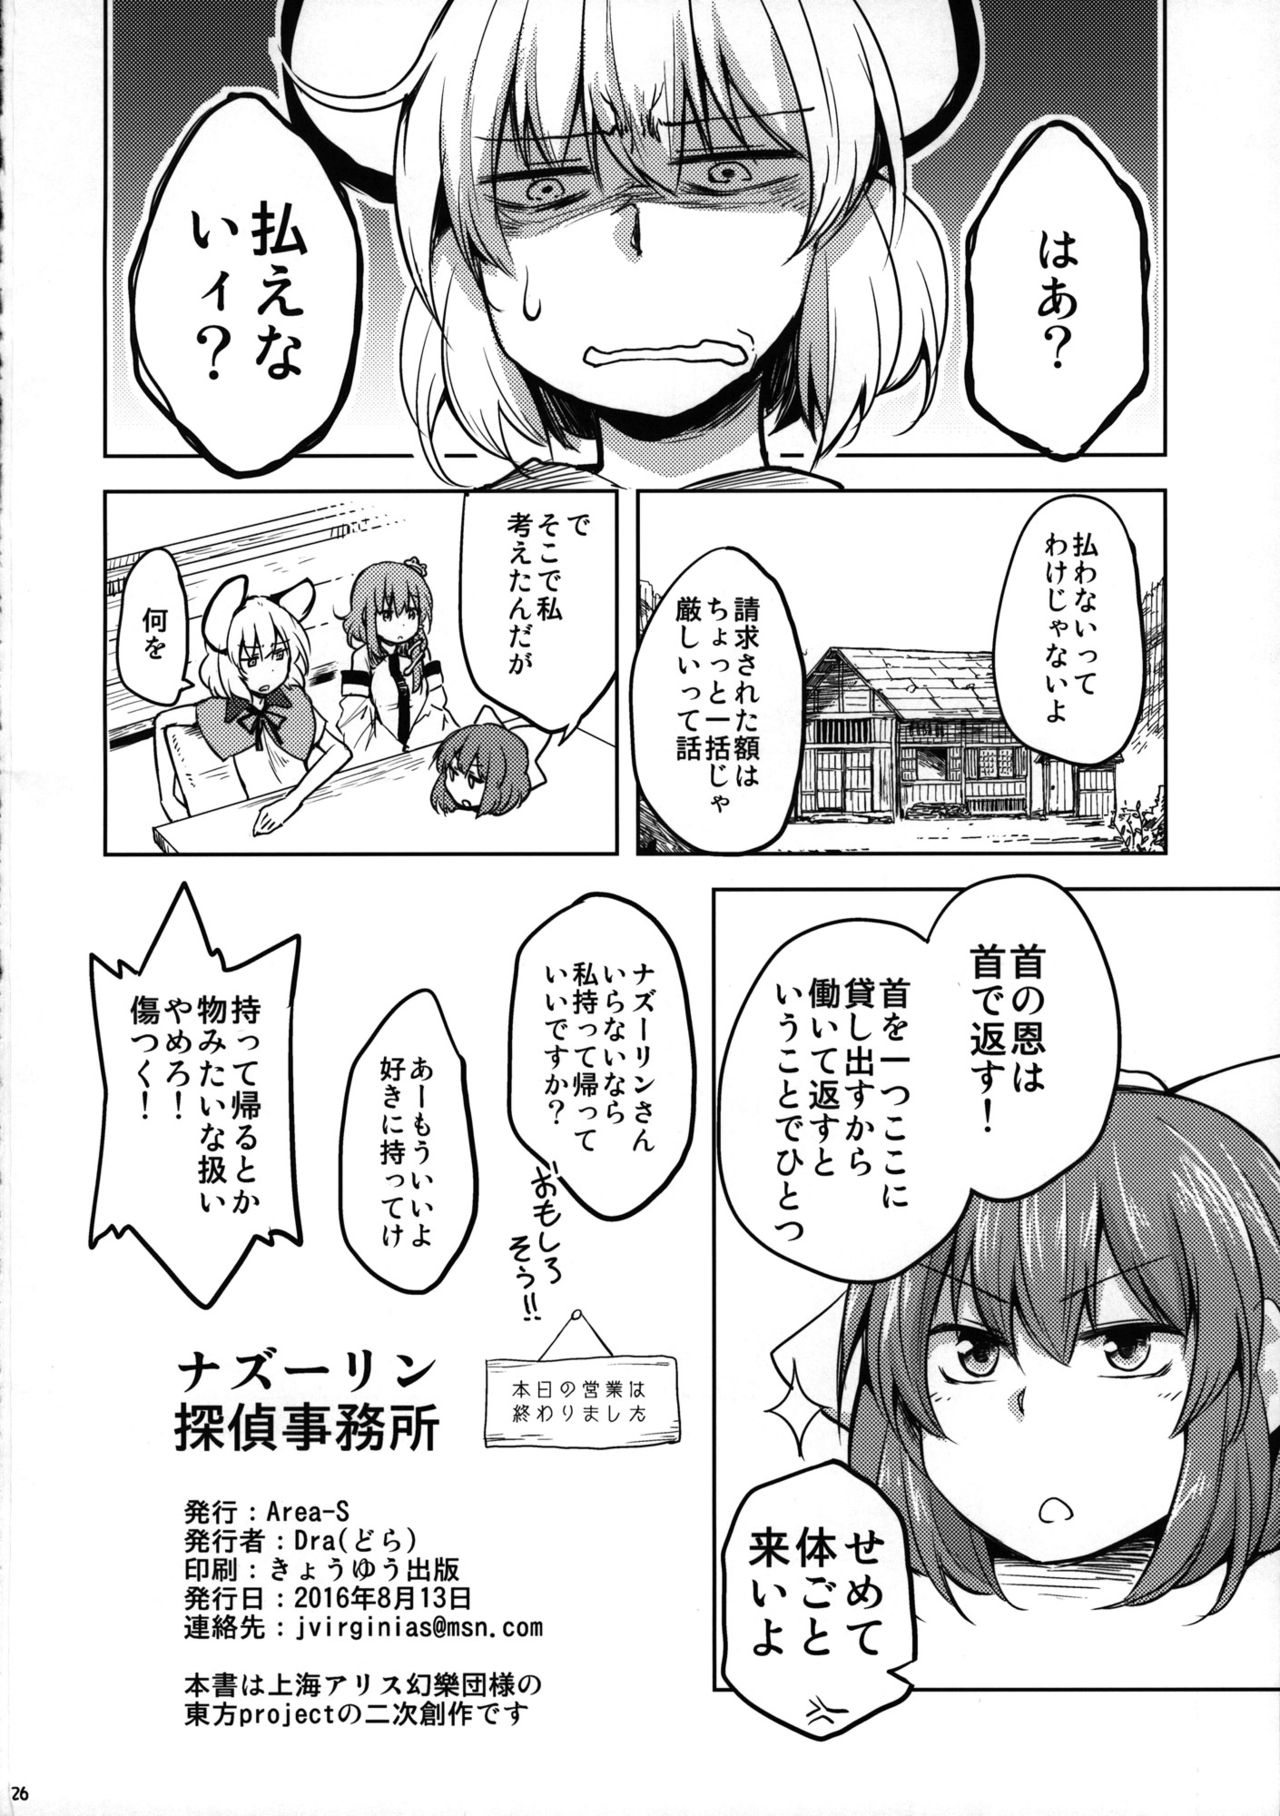 (C90) (同人誌) [Area-S] ナズーリン探偵事務所 (東方) (非エロ) 24